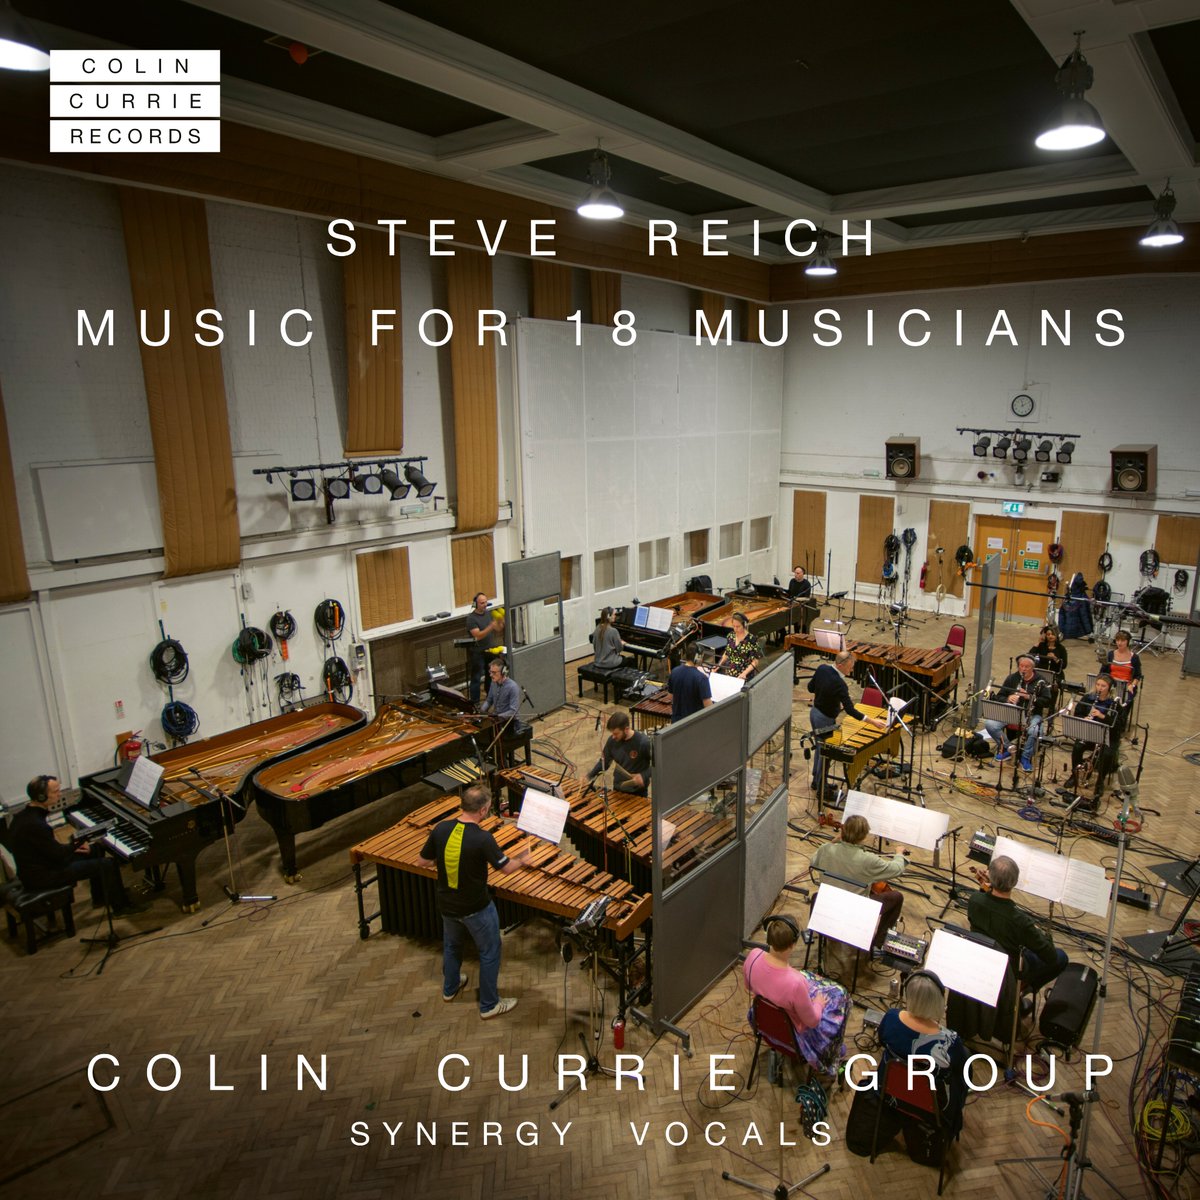 Pulsing, phased rhythms, suspended in space and time. Listen to @SteveReich's Music for 18 Musicians, performed by the one and only virtuosic percussion ensemble, the @ColinCurrieGrp, available in Spatial Audio: apple.co/MusicFor18Musi…